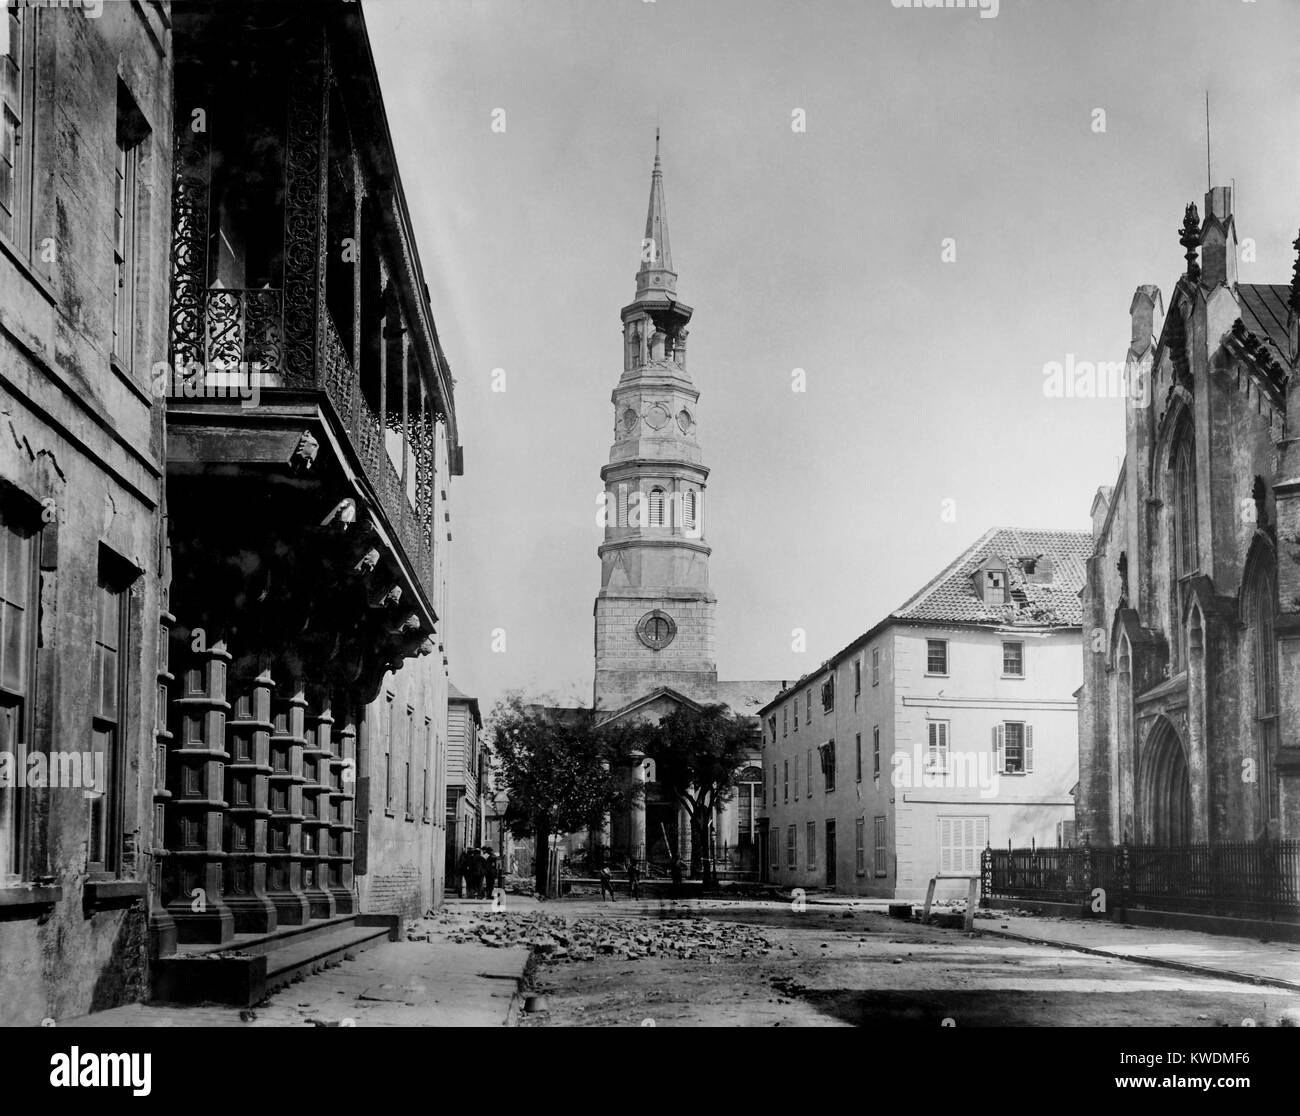 St. Philips Church tower damaged by Charleston earthquake of August 31, 1886. It was the most destructive earthquake ever recorded in the eastern United States, measuring 6.9–7.3 on the Richter scale. Photo by John K. Hillers (BSLOC 2017 17 54) Stock Photo